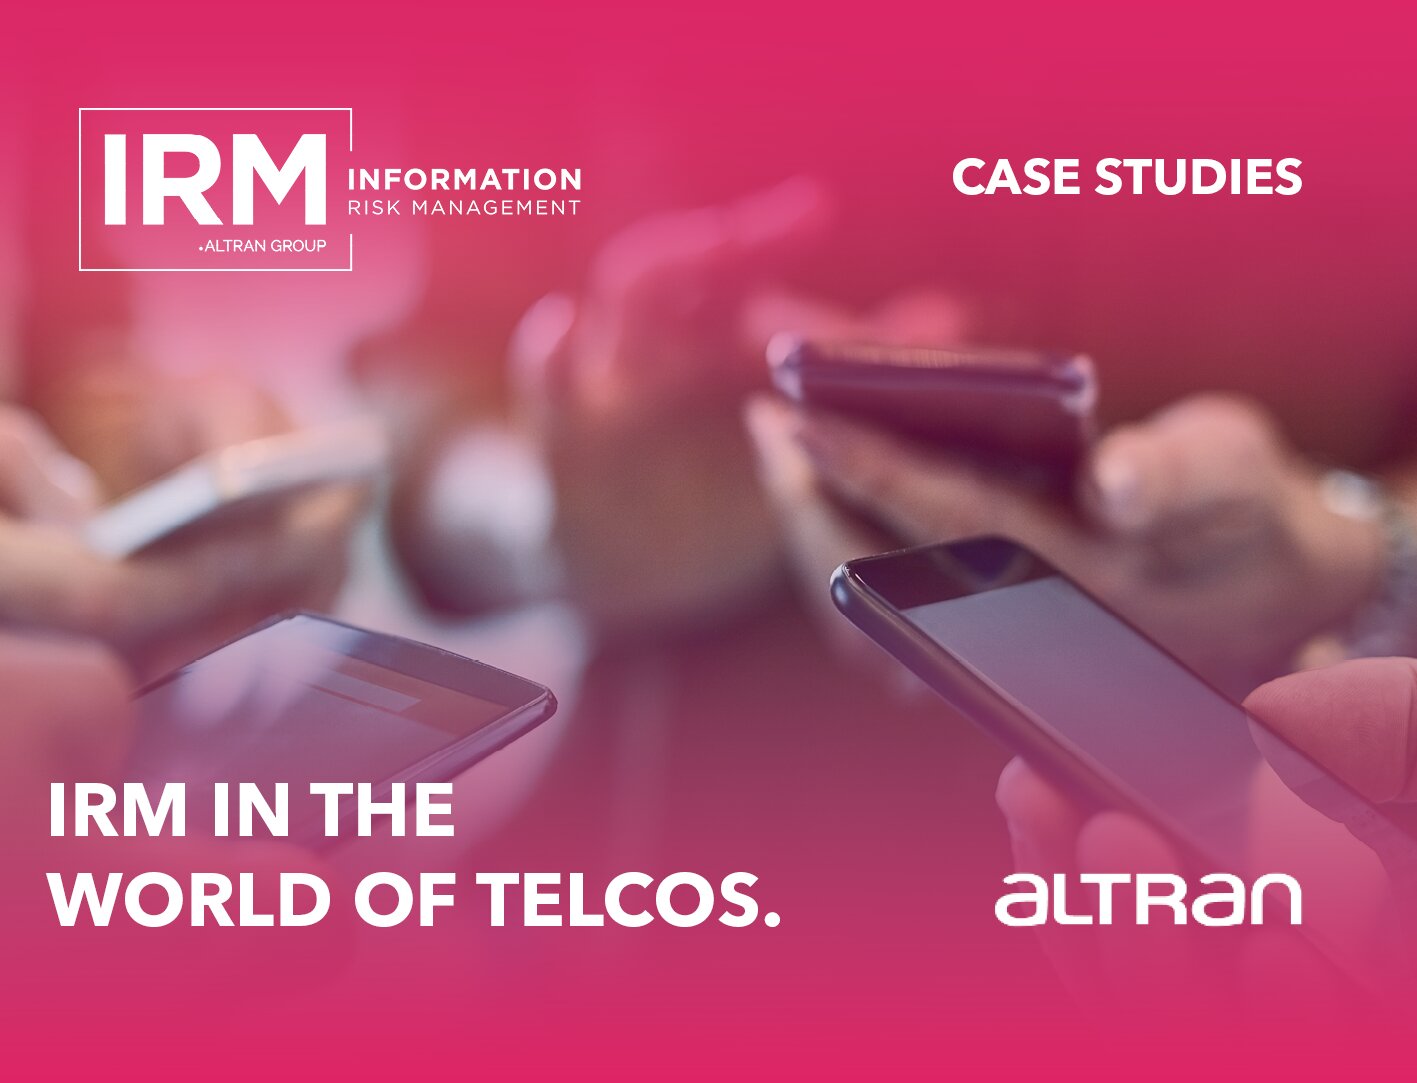 IRM_in_the_world_of_telcos